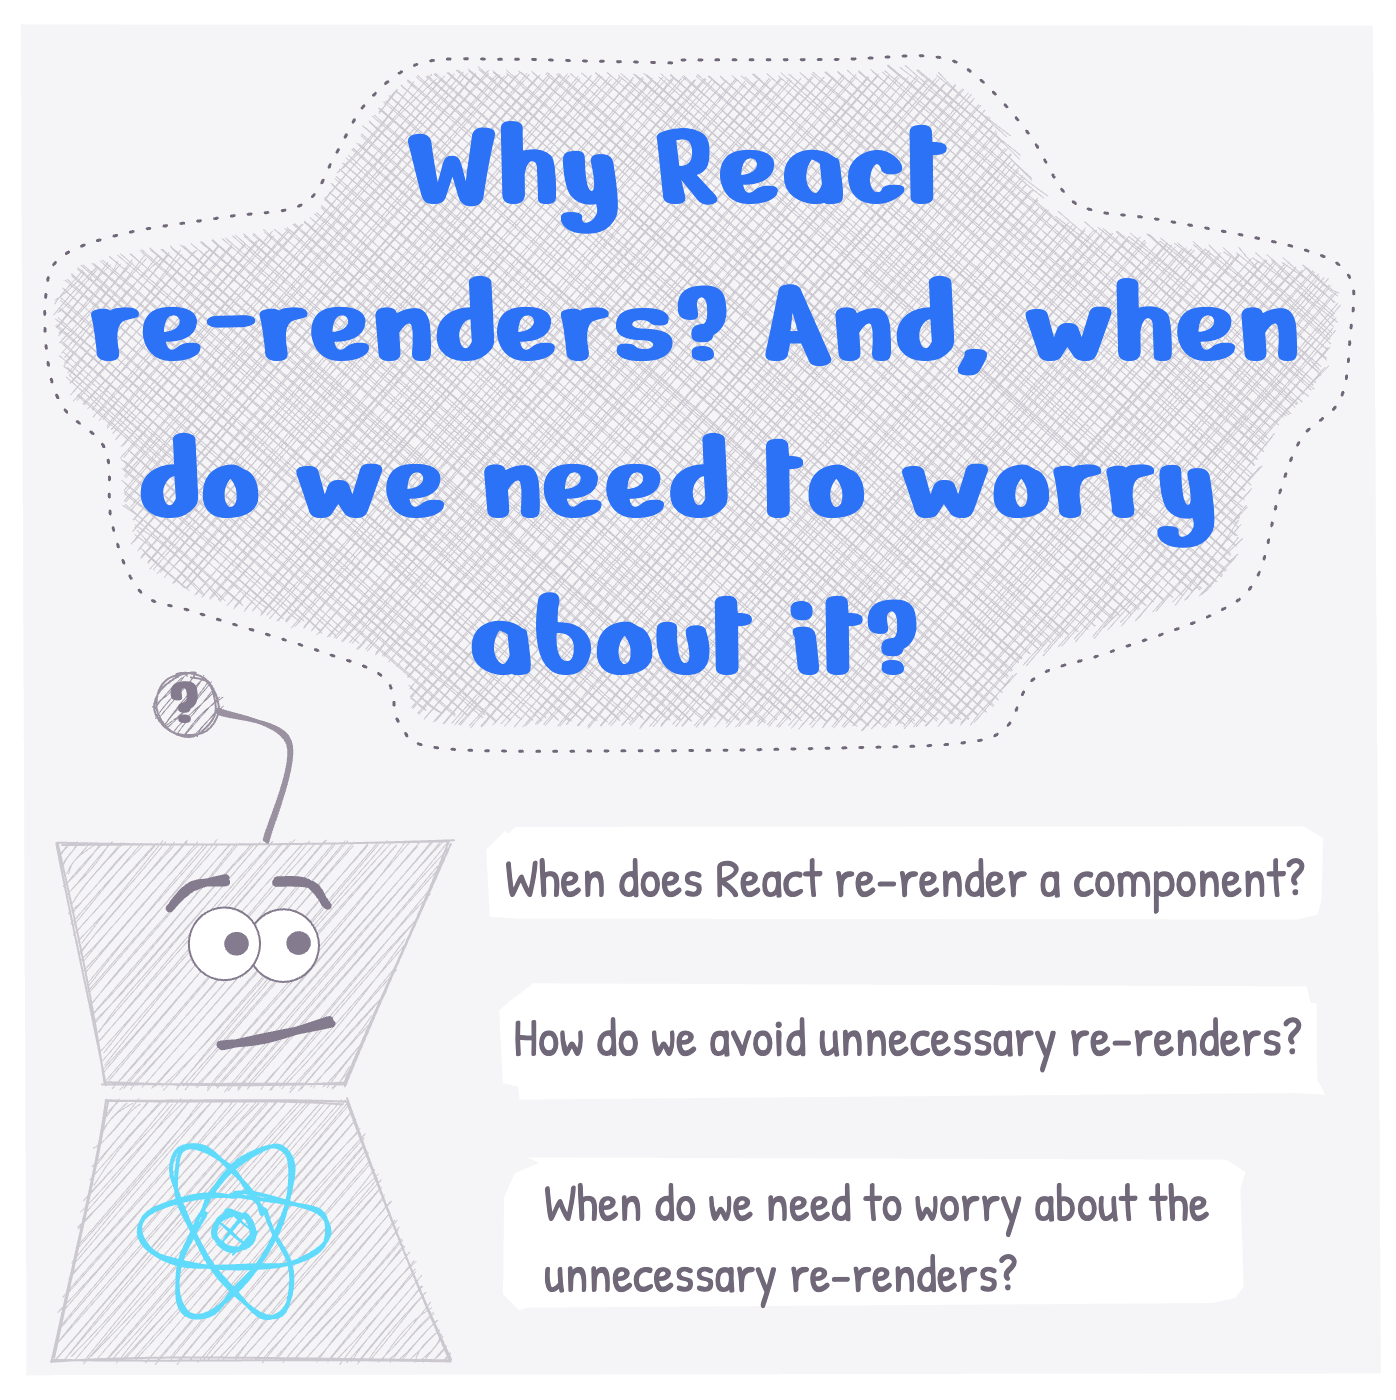 Why does React re-render and when do we need to worry about it?